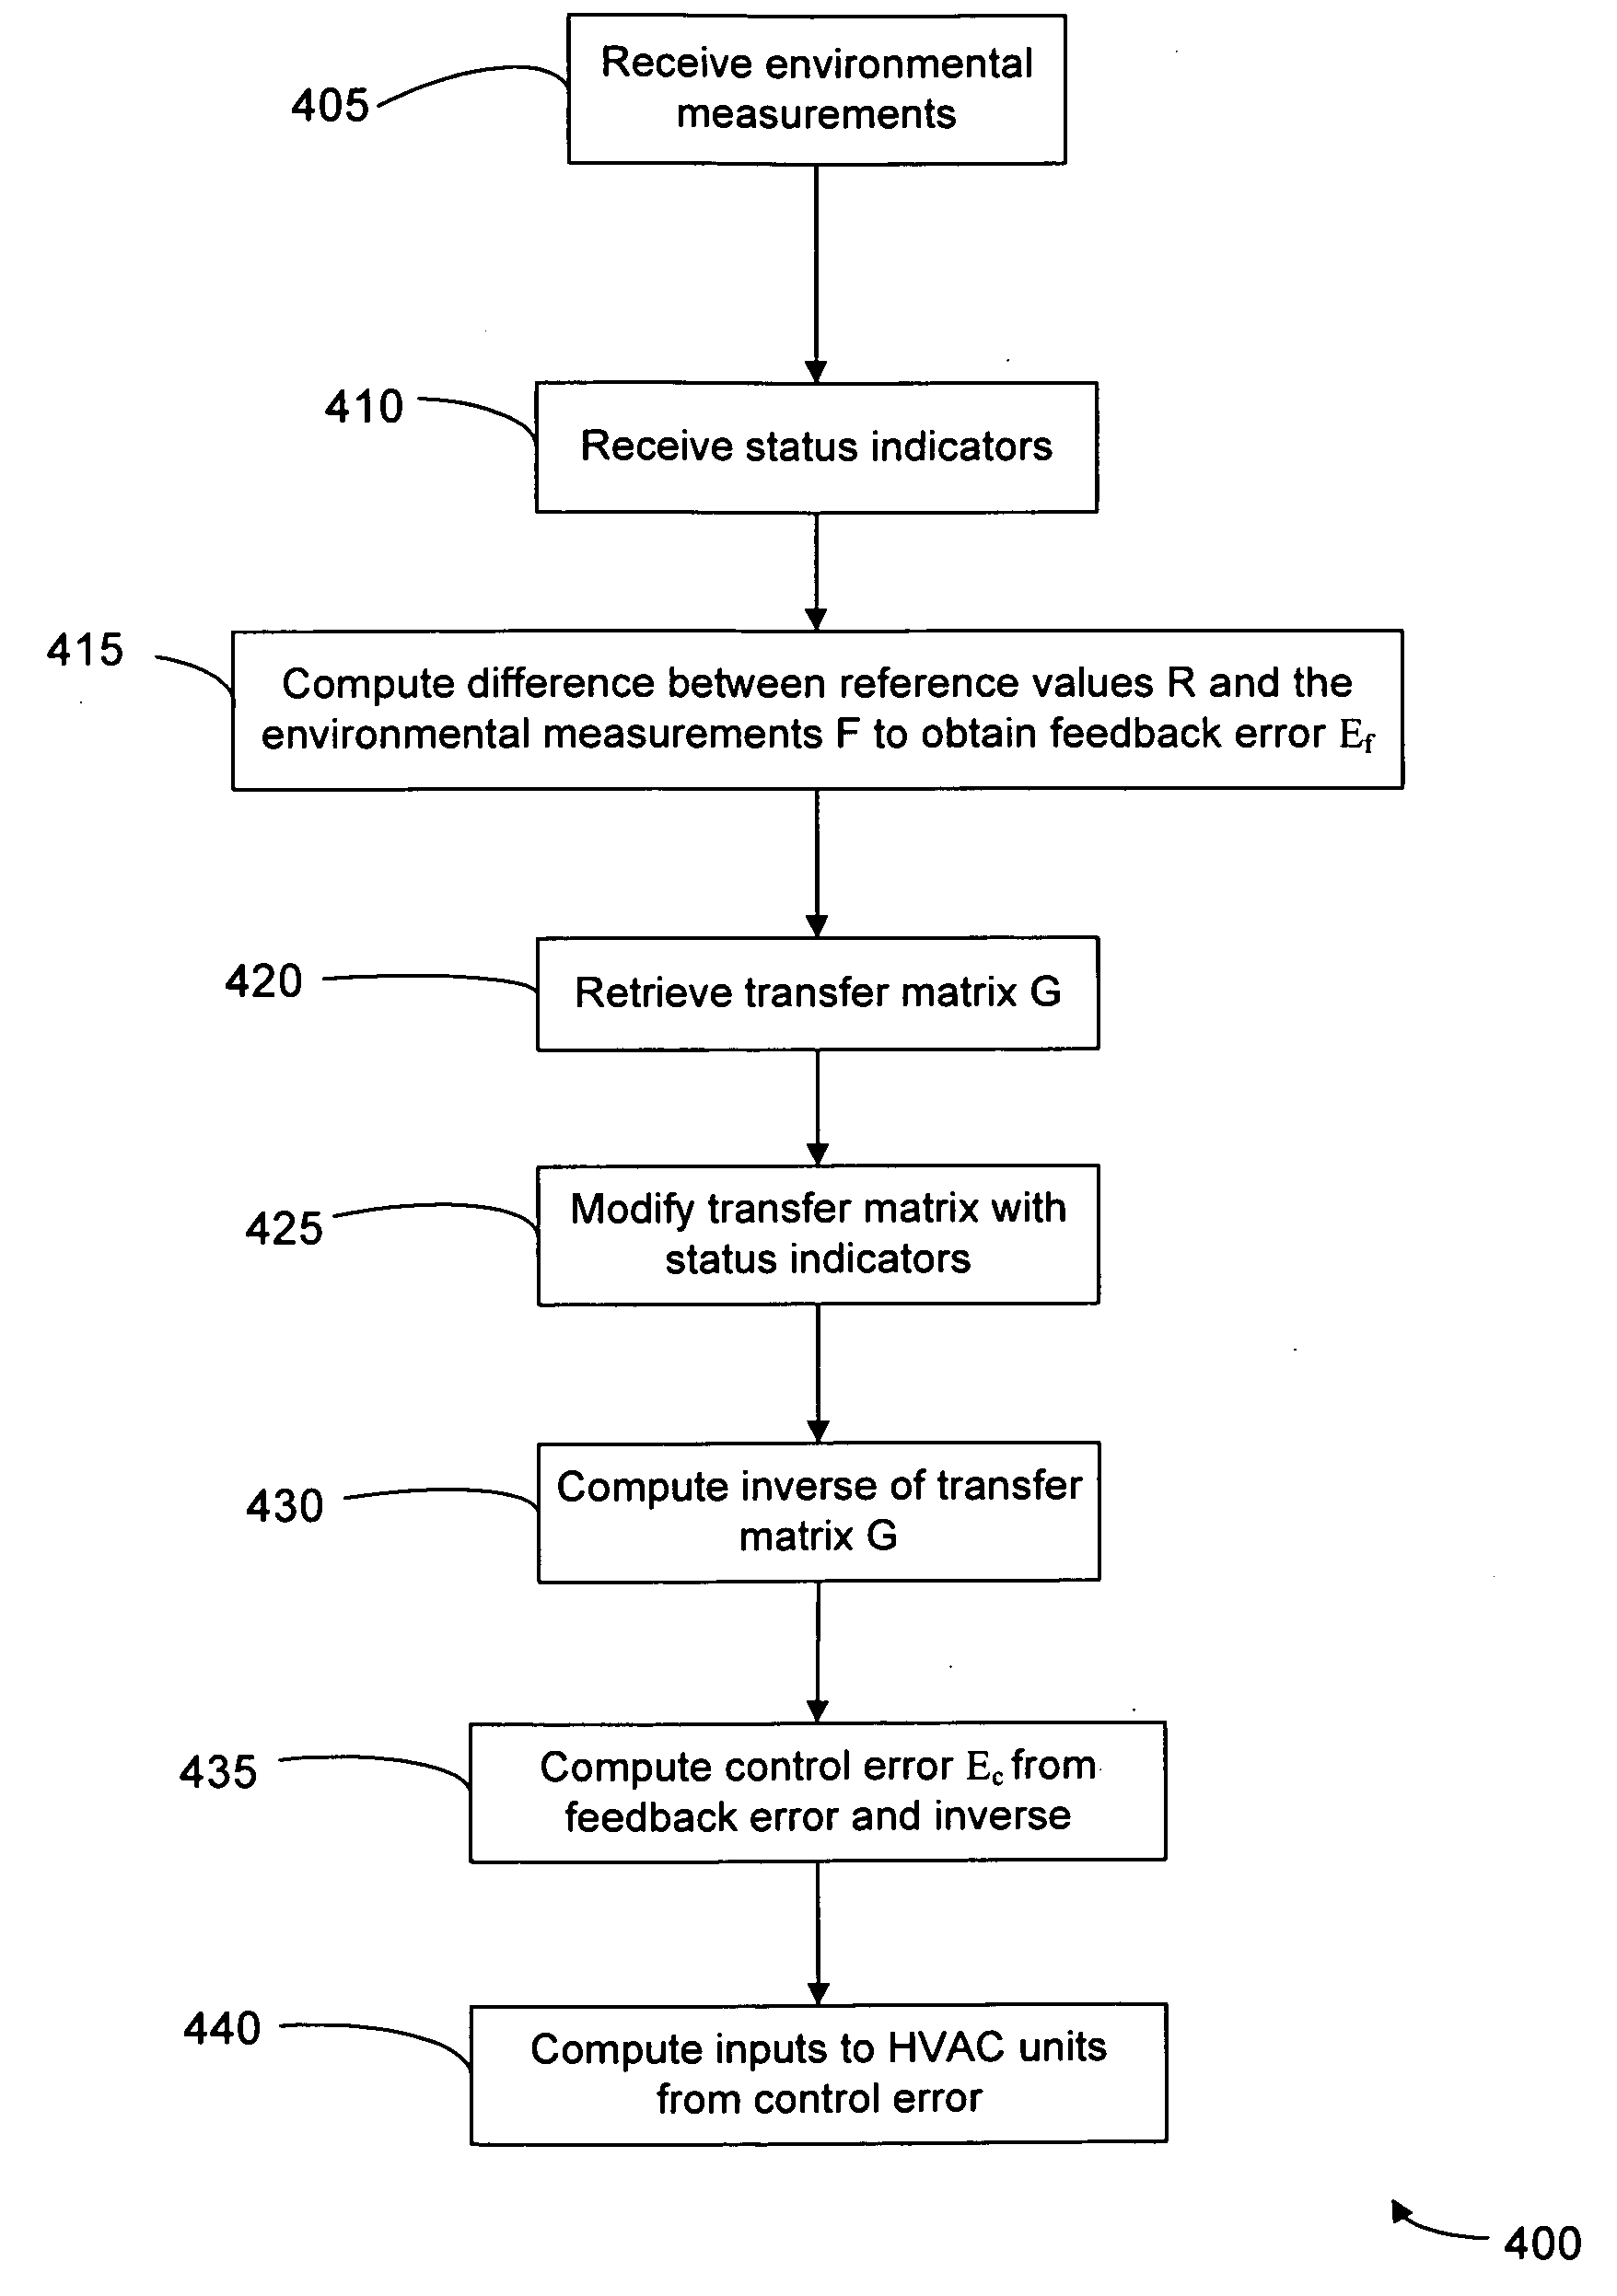 Method and apparatus for coordinating the control of HVAC units